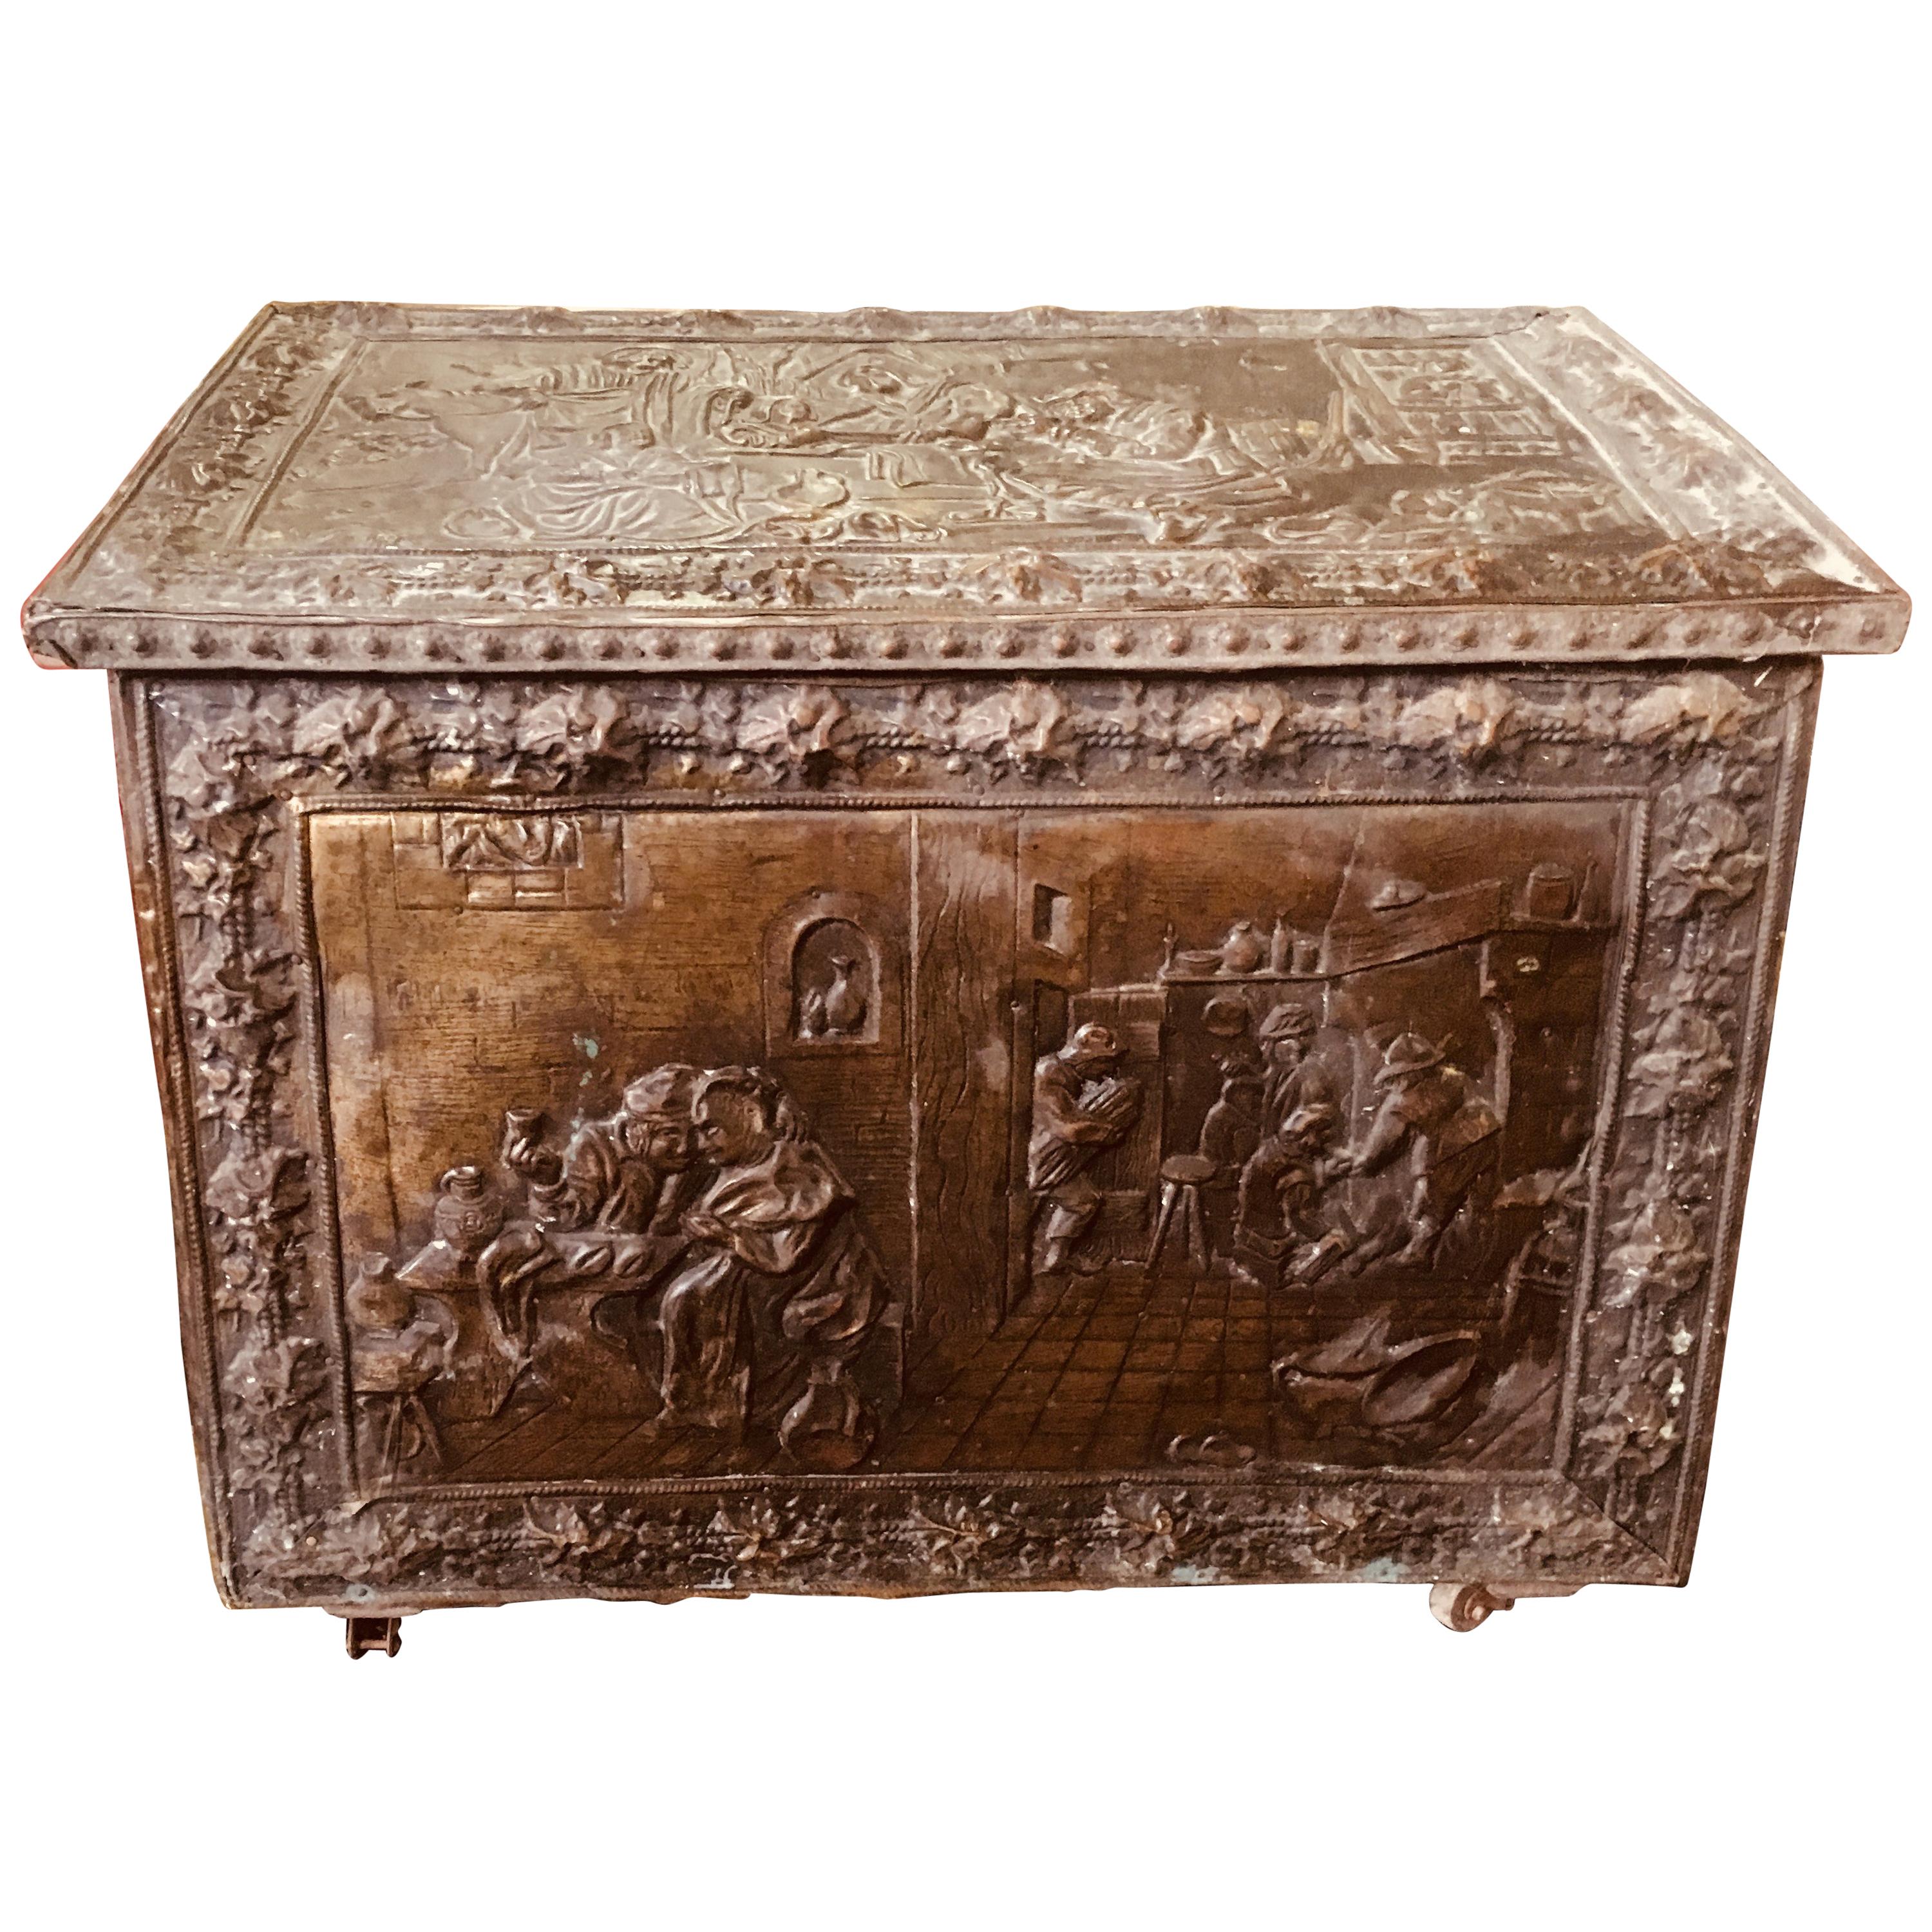 18th Century French Wooden Coffer or Trunk Covered with Wrought Iron